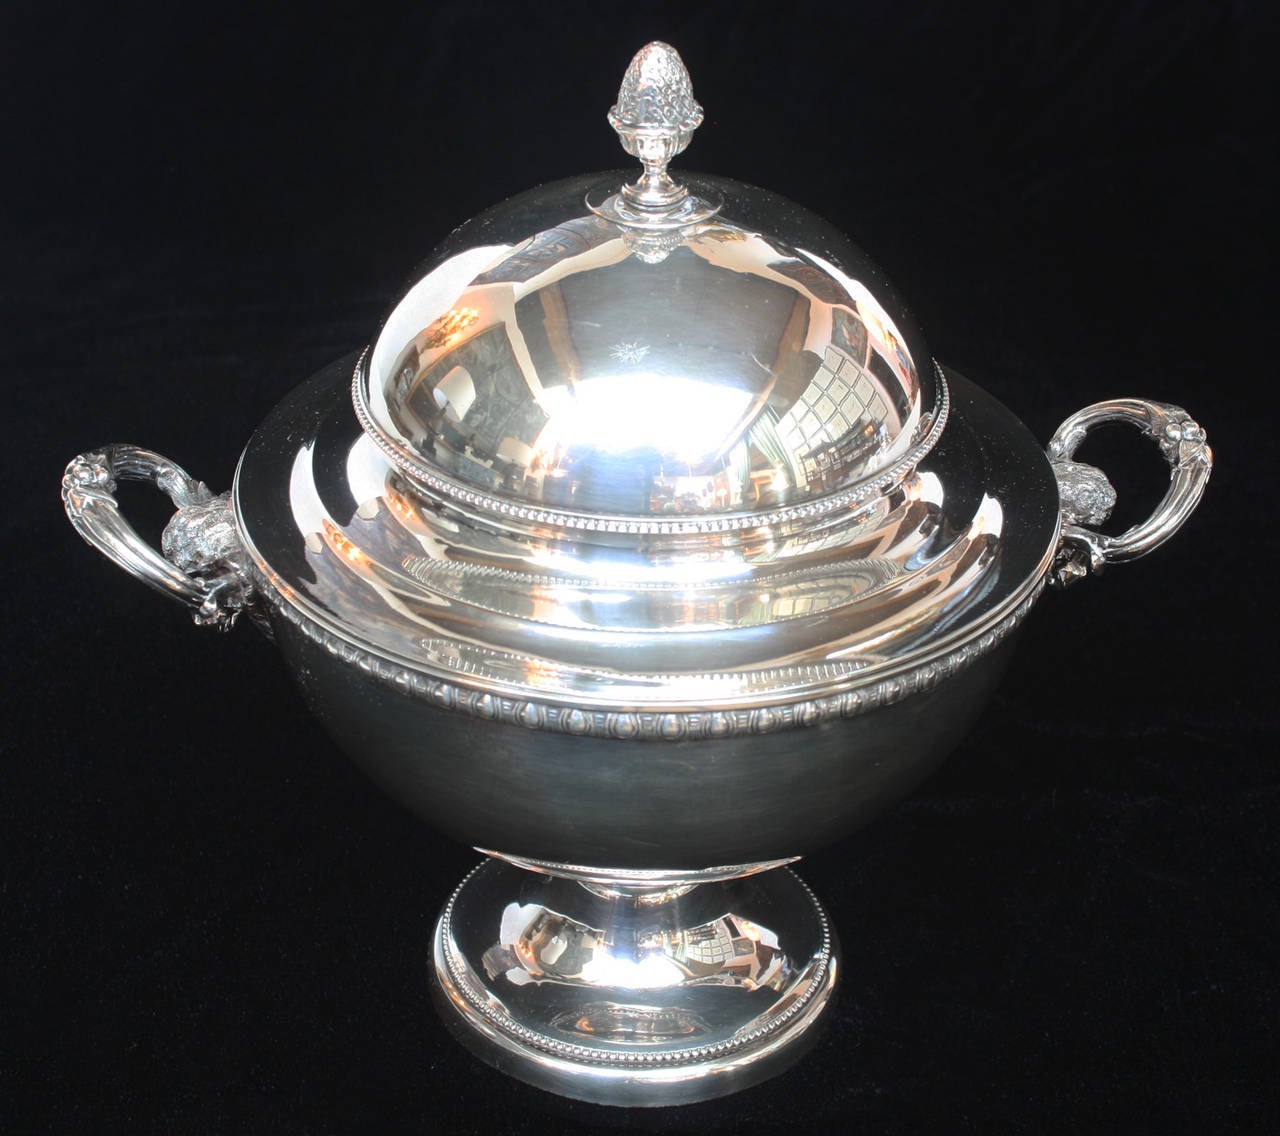 A Tiffany & Company, circa 1870, Sterling Silver Horse Racing Trophy, Dome-Lidded Tureen with Acorn Finial, Double-Handled with Rams Head Mounts, Egg and Dart Decorative Band at Top of Globular Body, on Pedestal Base with Beaded Border, Inscribed in